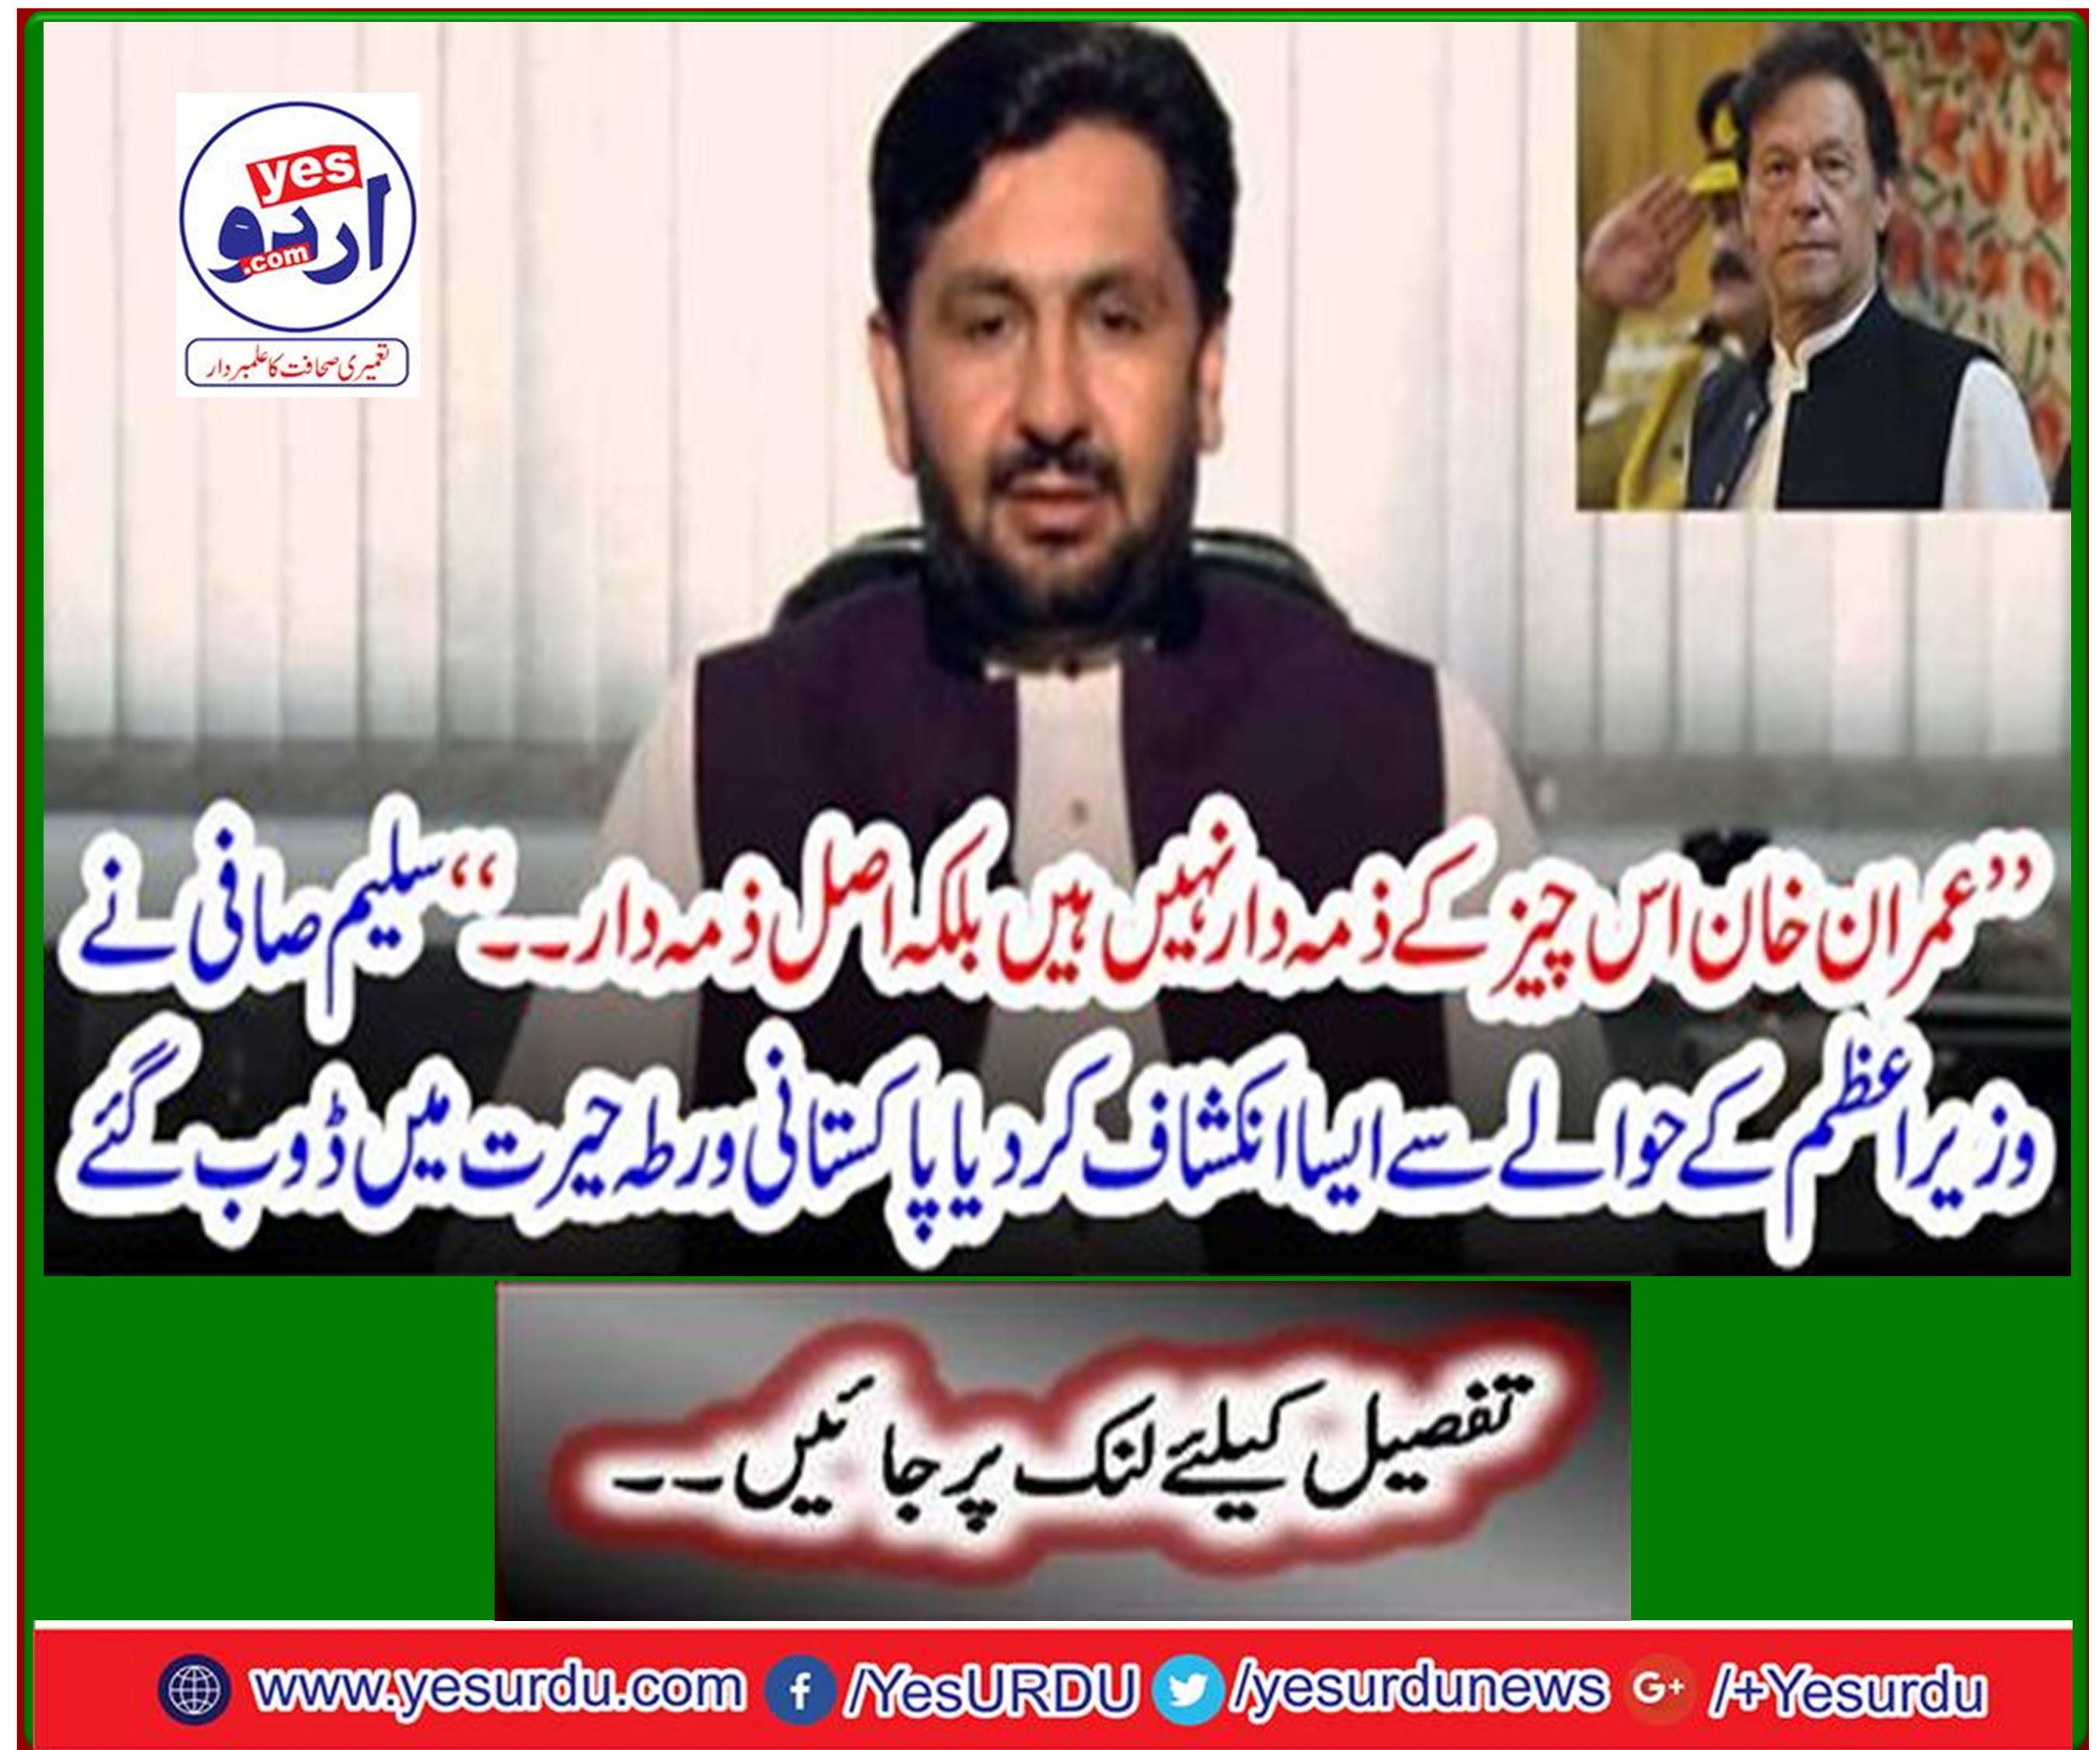 Salim Safi reveals to the Prime Minister that the Pakistani side is shocked